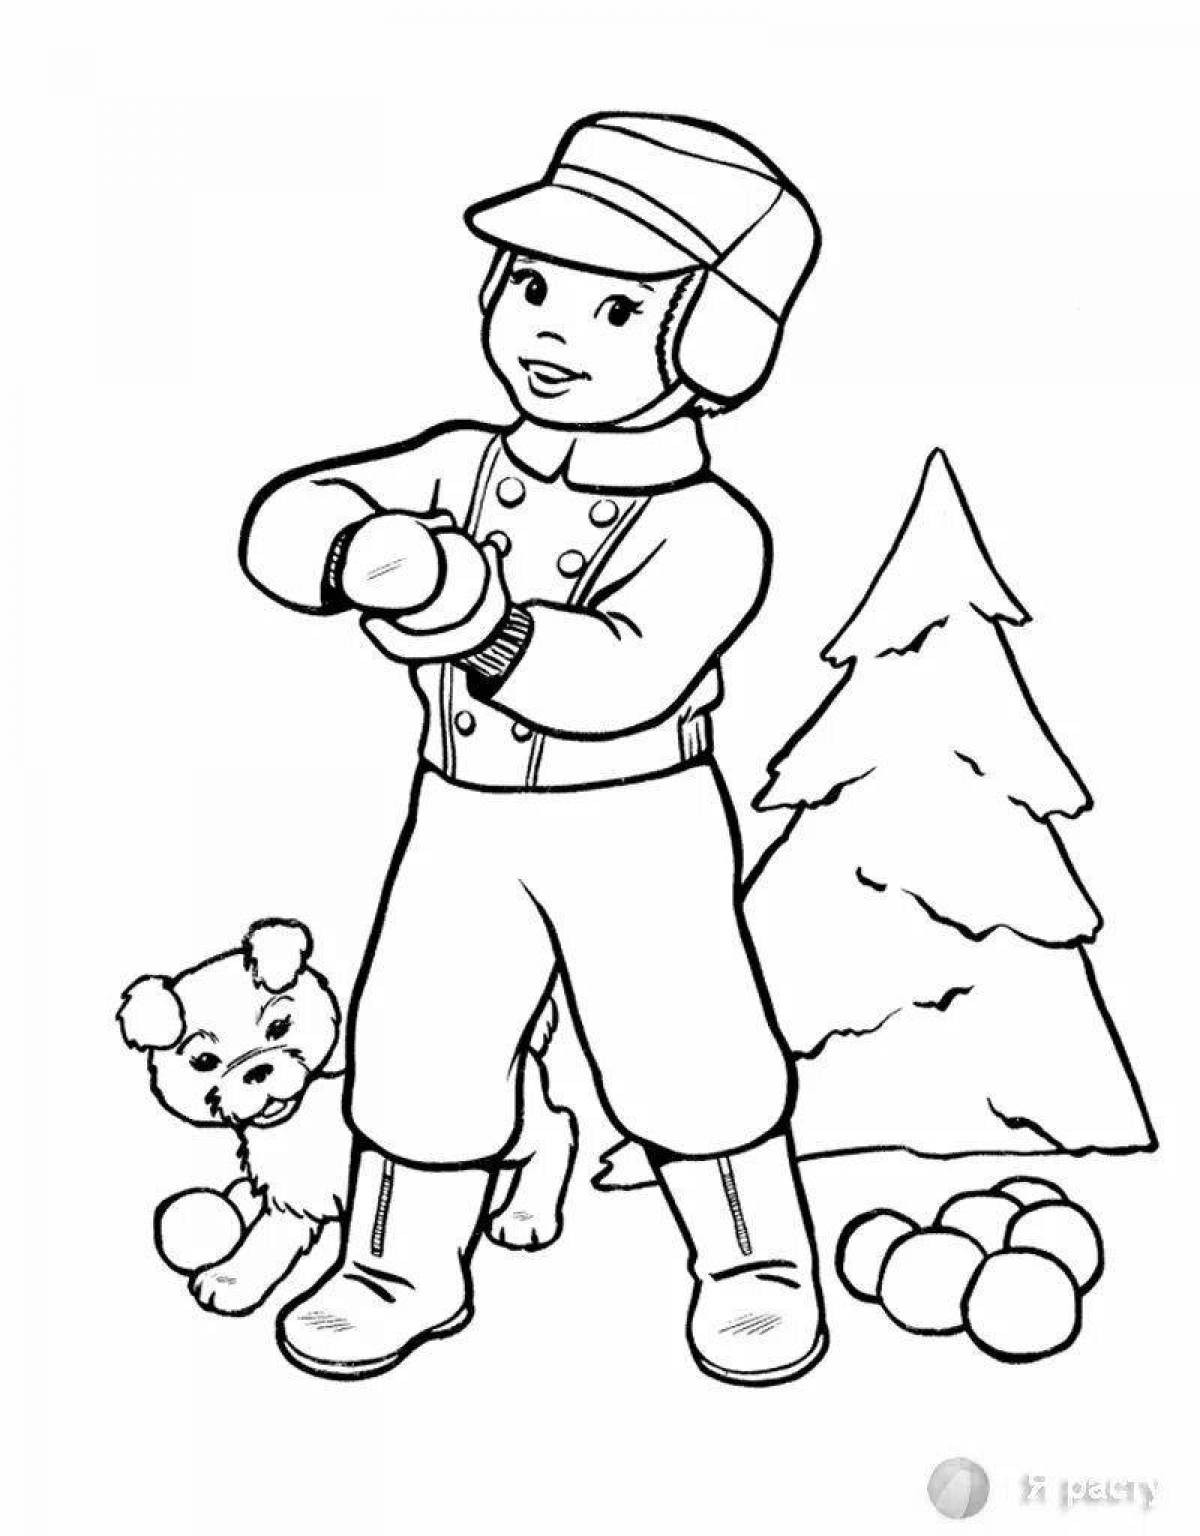 Animated children playing snowballs coloring book